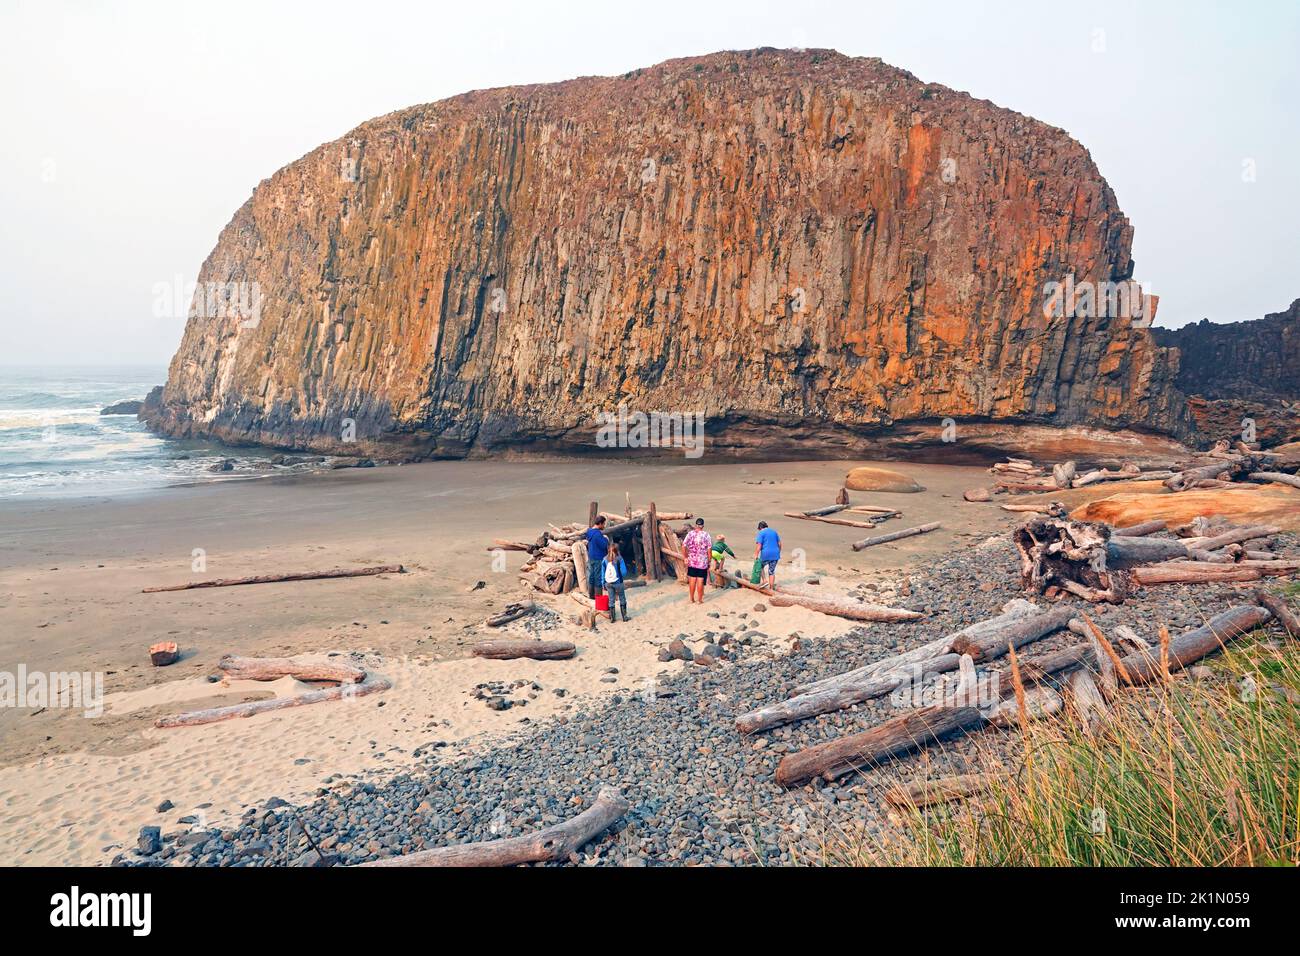 A beach shack made from driftwood logs at Seal Rock, Oregon, on the central Oregon Coast. Stock Photo